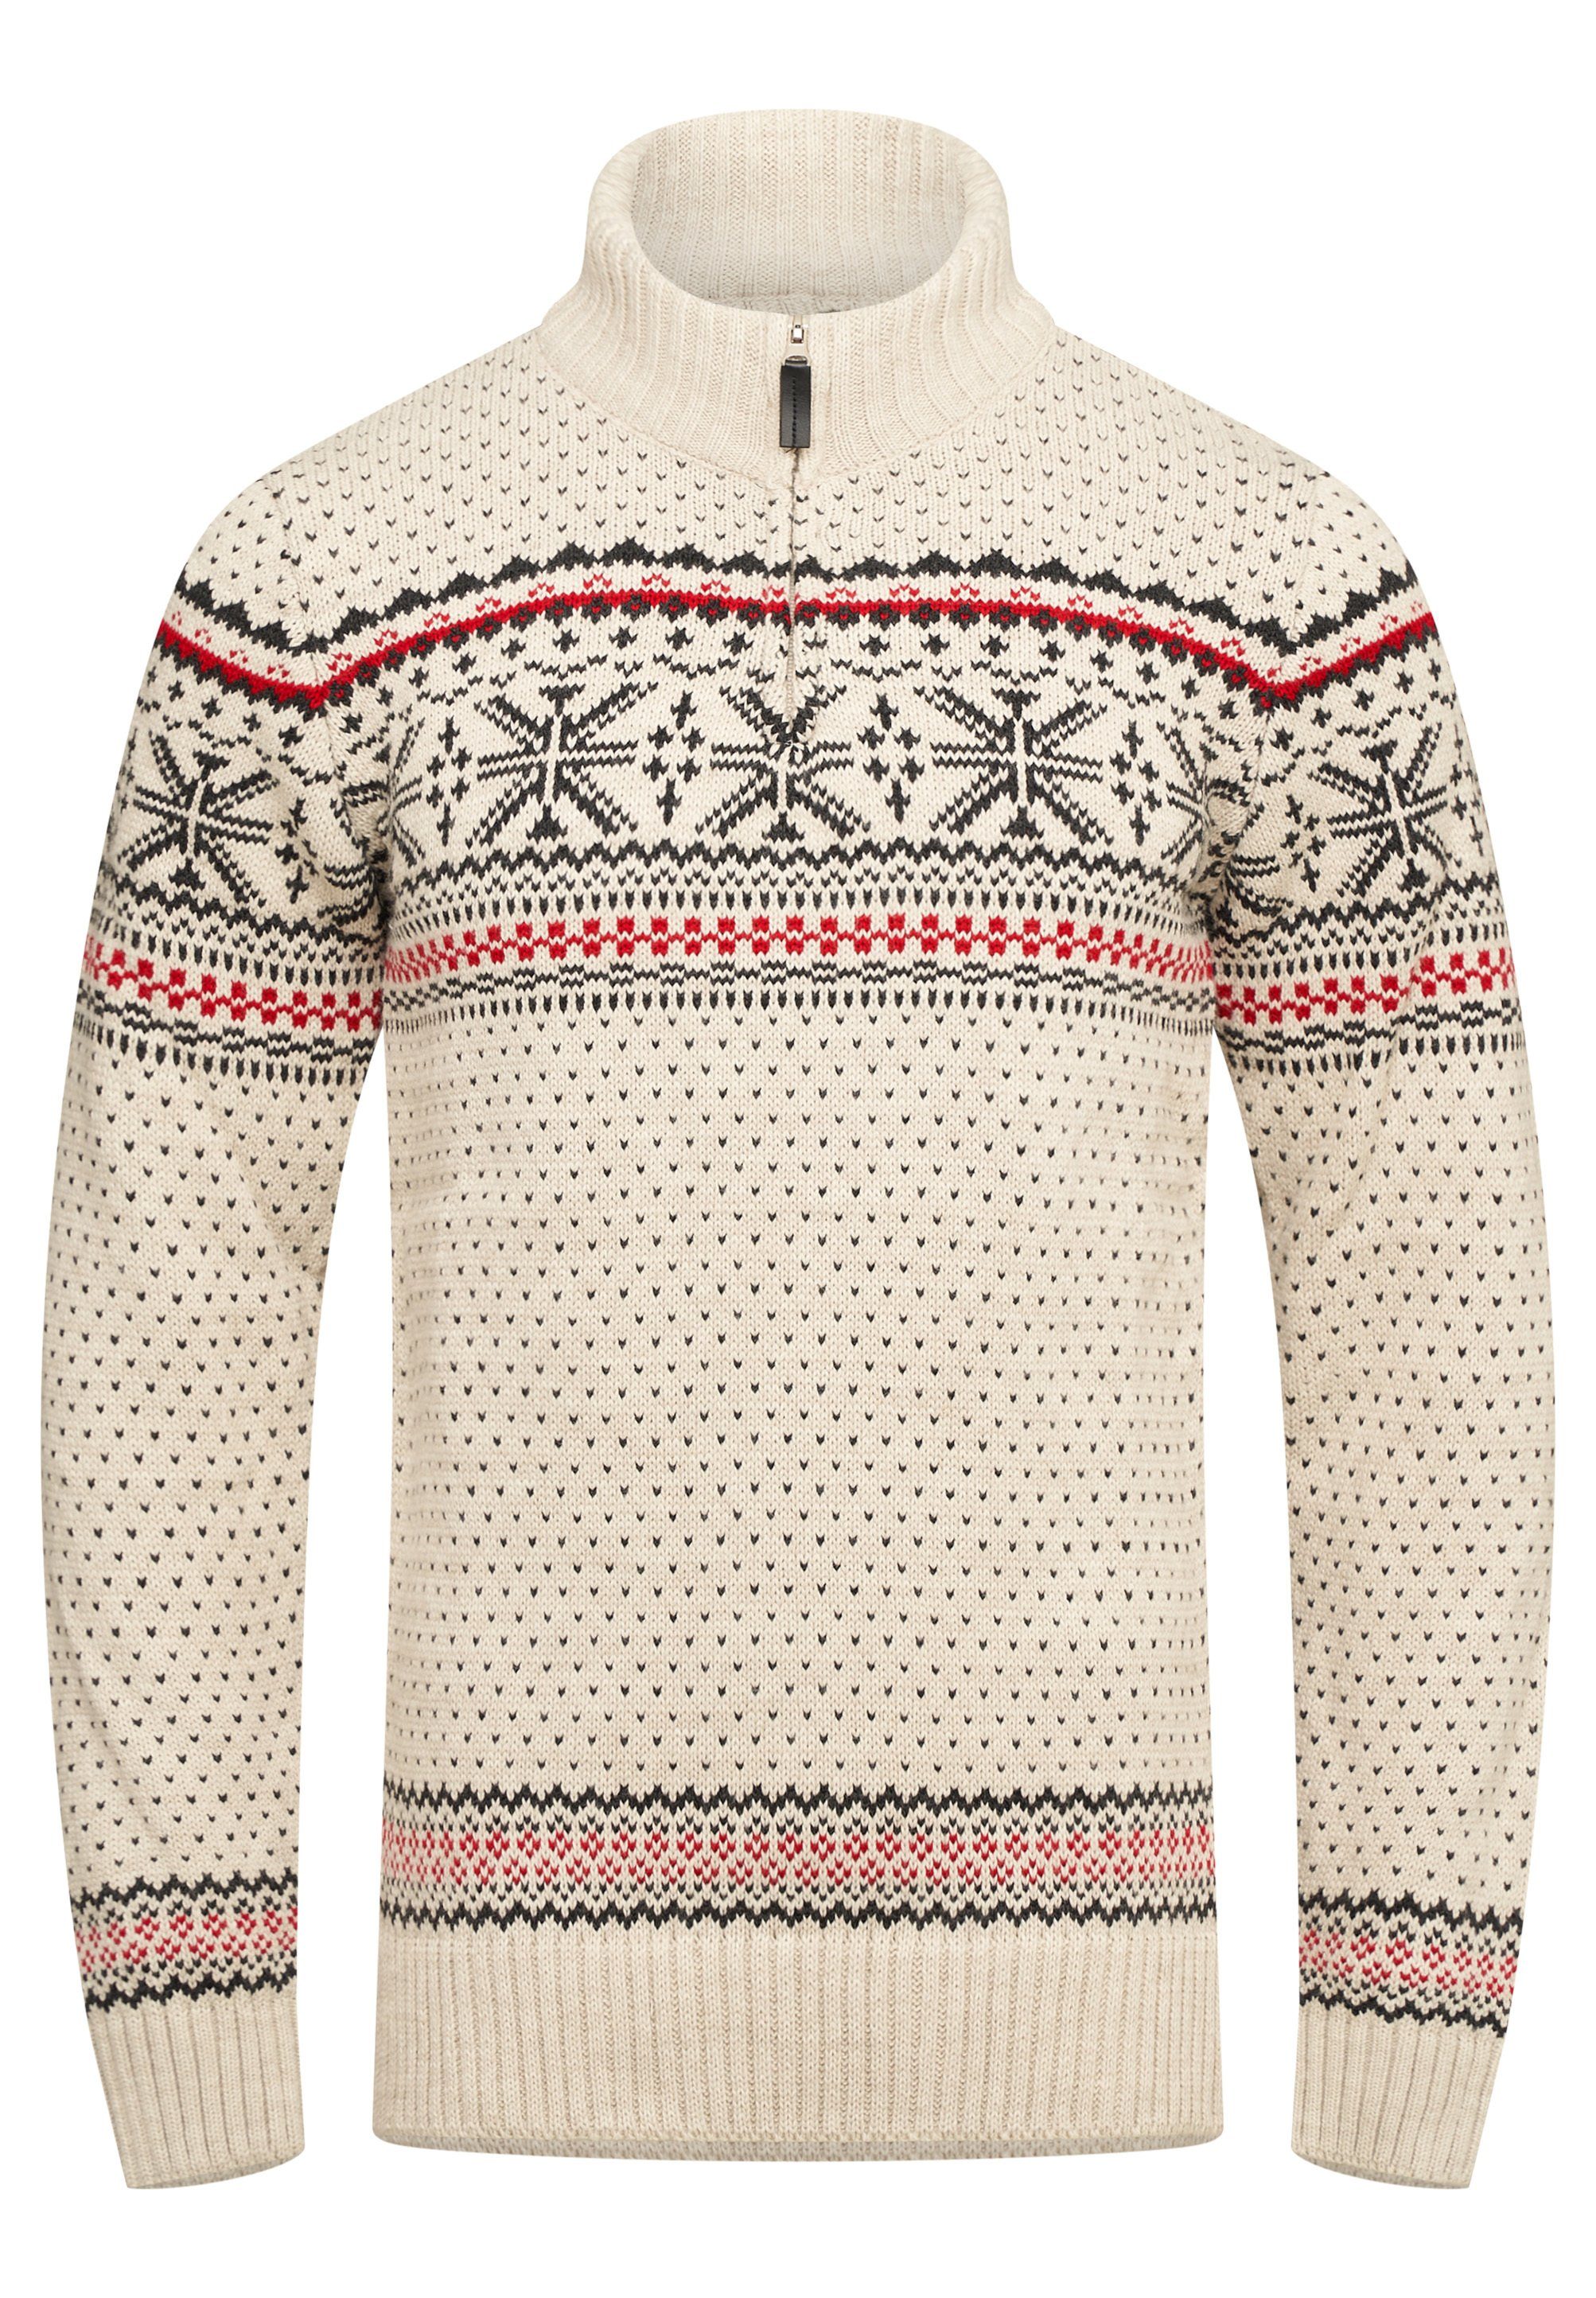 behype Strickpullover BHGALENA Grobstrick Norweger-Muster Troyer